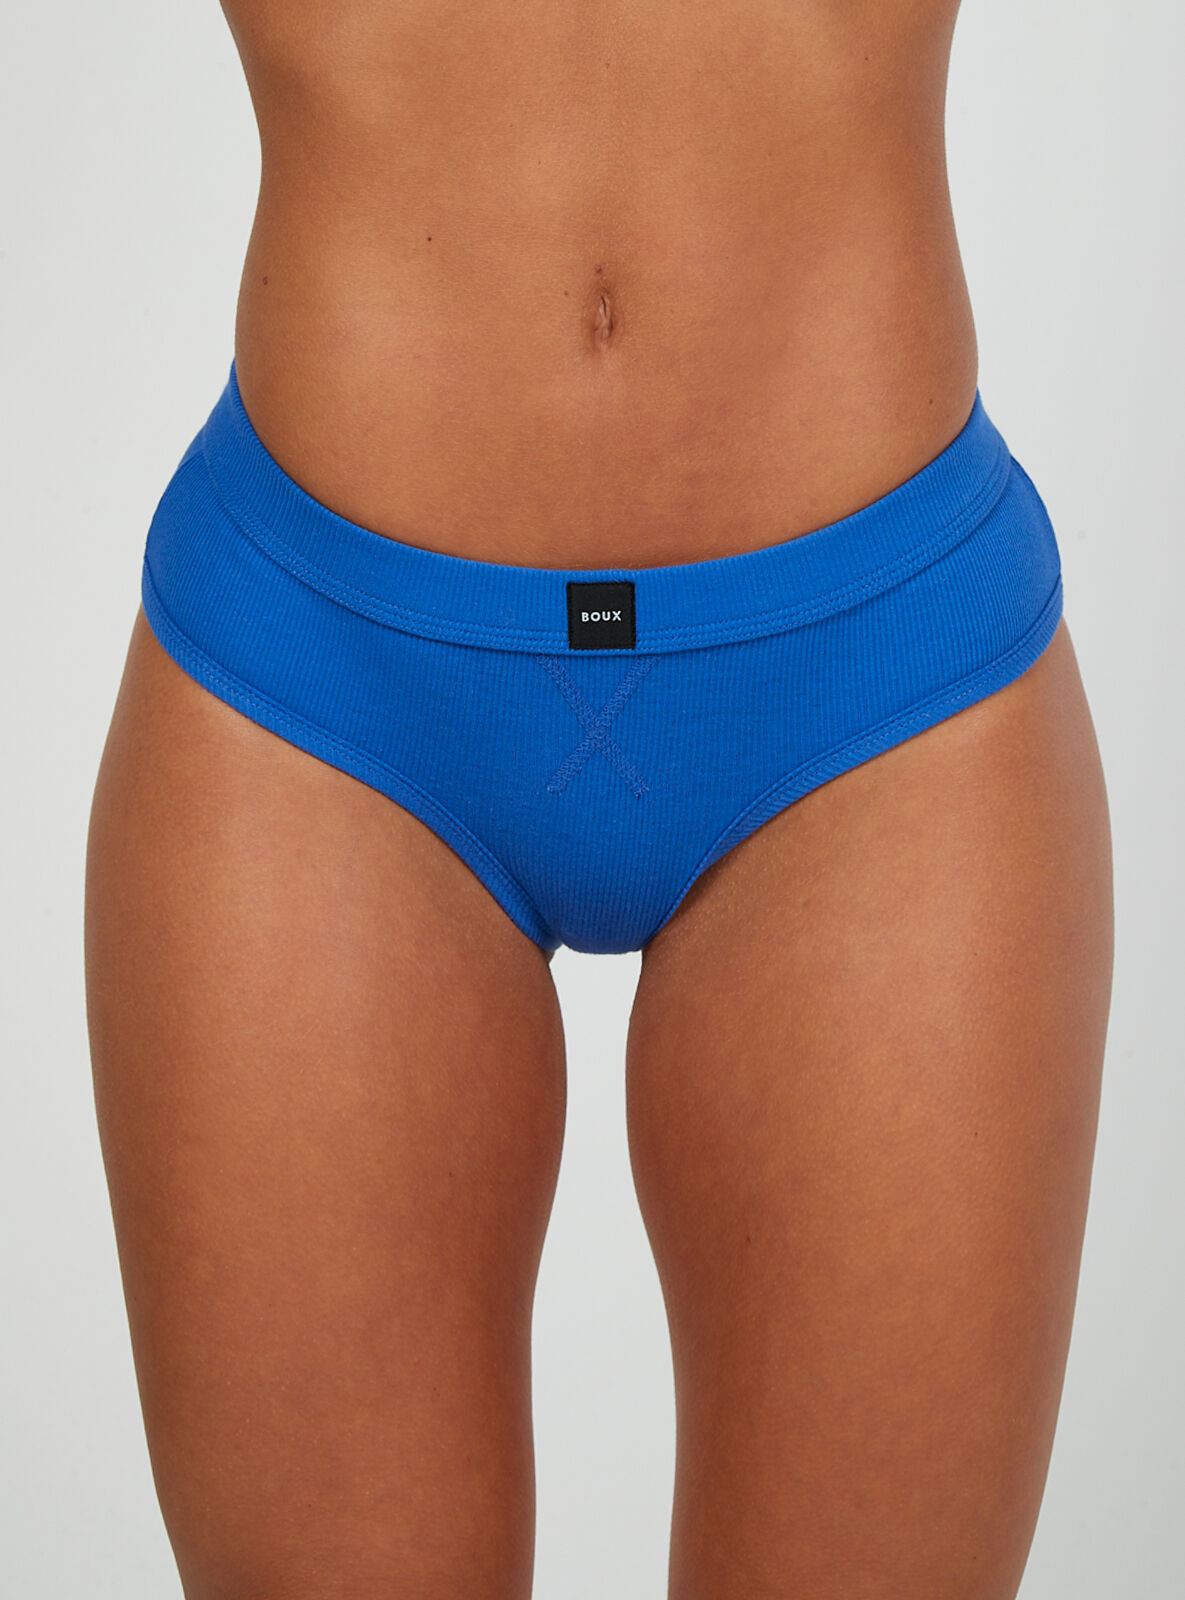 Boux Avenue Nell ribbed cheeky shorts - Cobalt Blue - 16